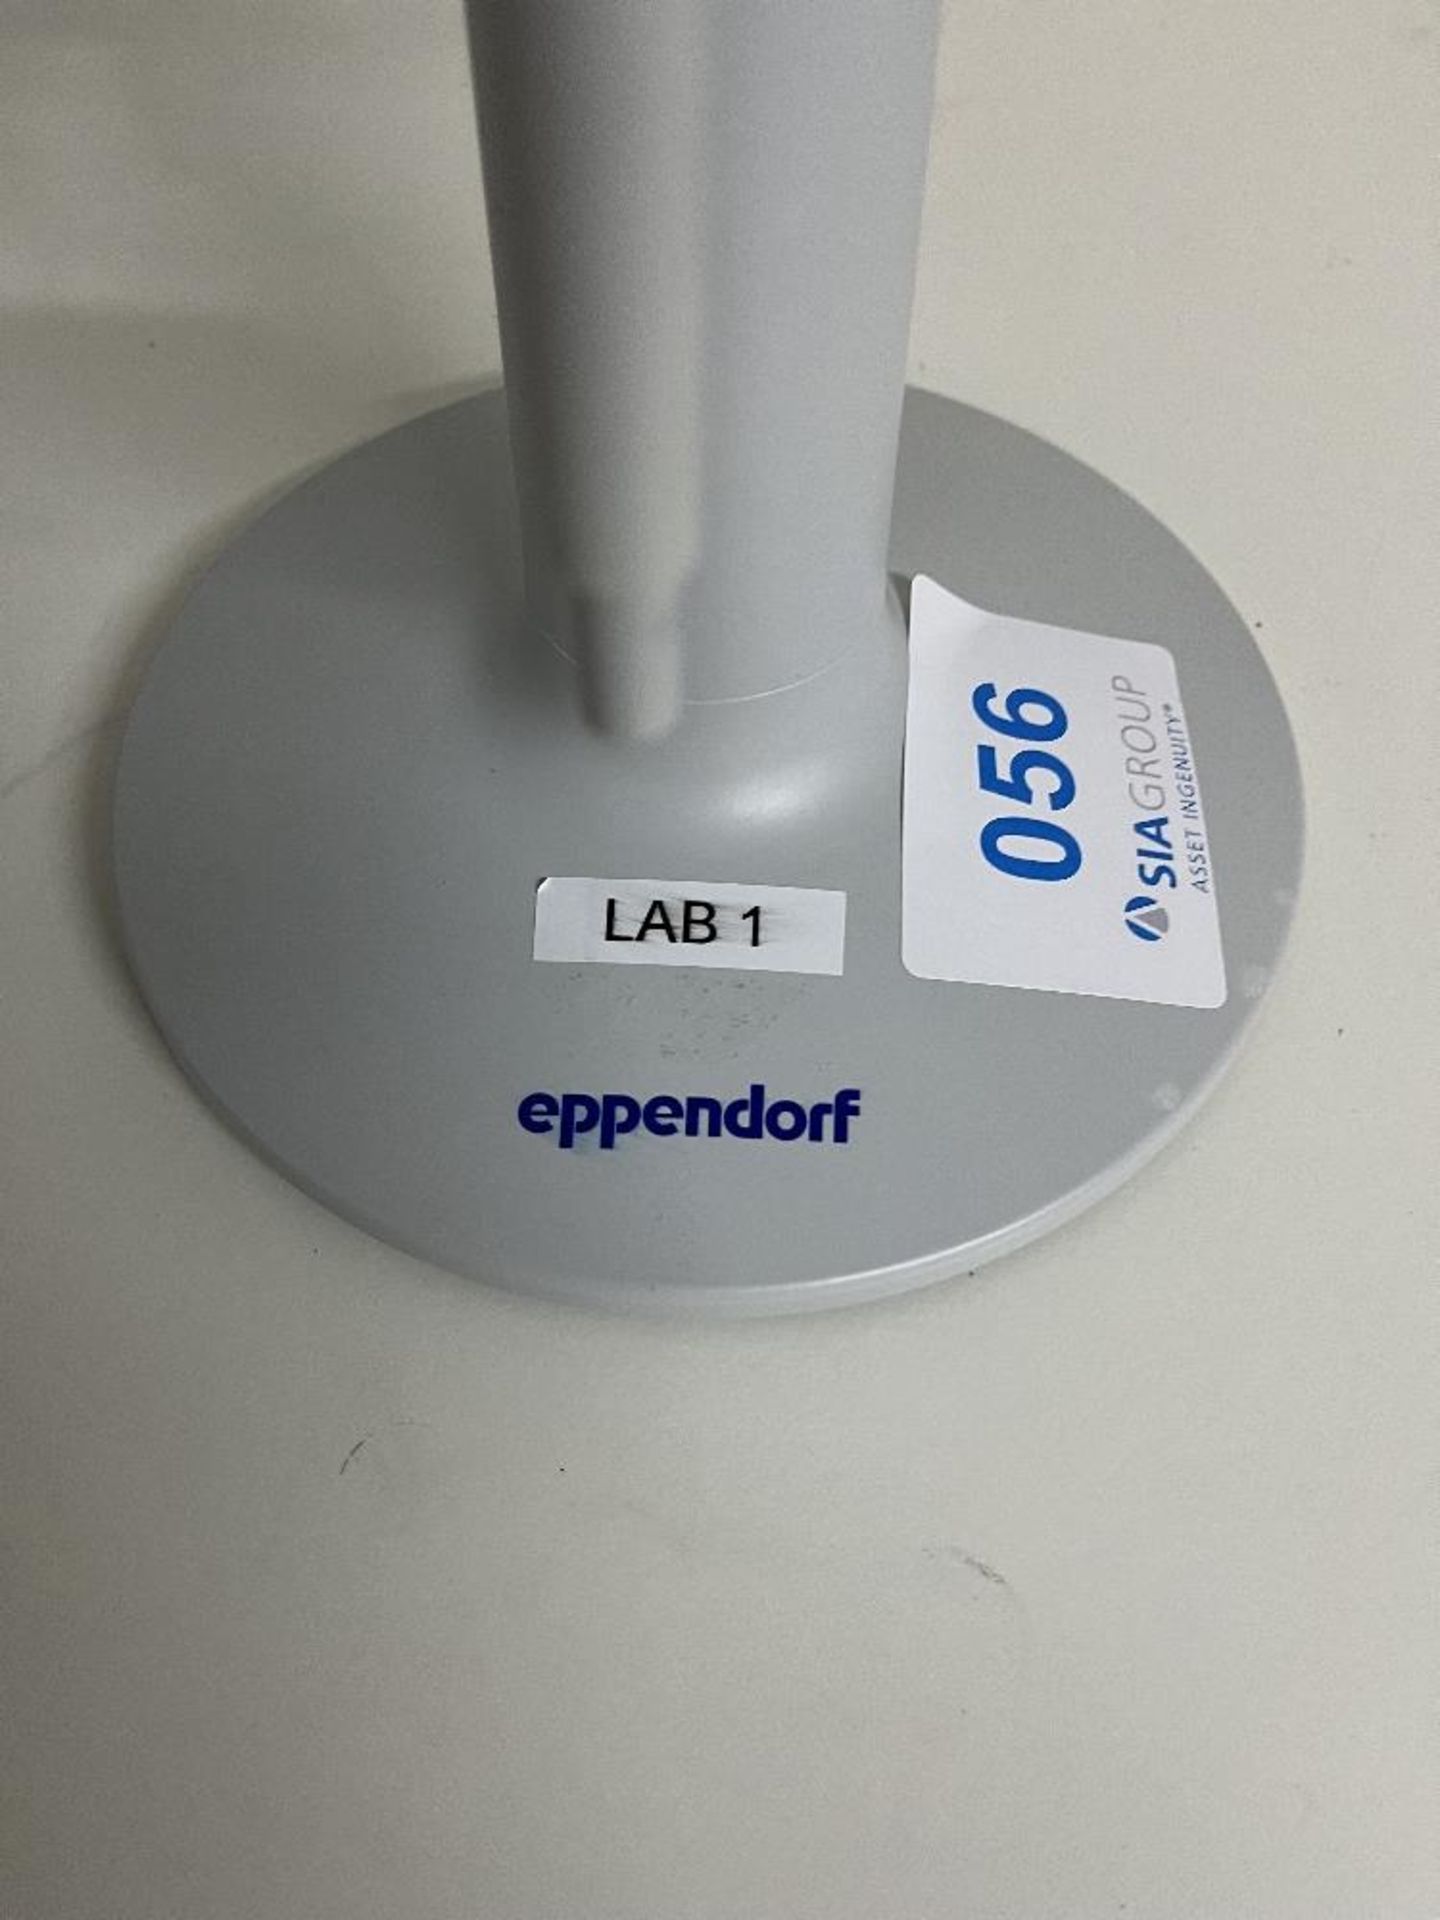 Eppendorf Pipette Carousel 2 with (6) Adjustable Volume Pipettes - Image 2 of 8